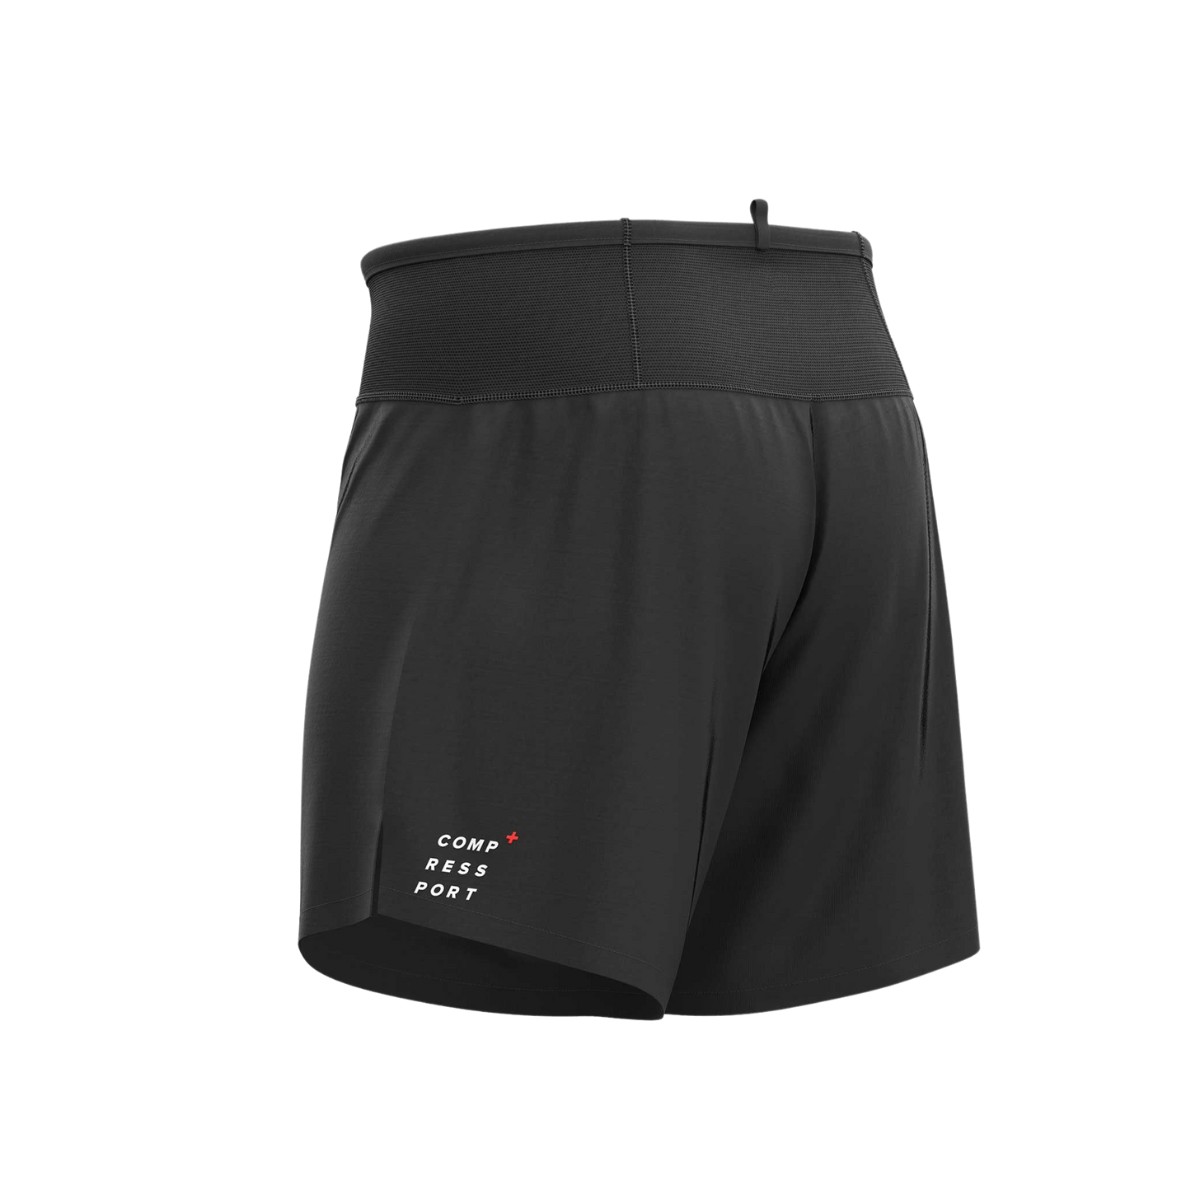 Buy Compressport Trail Racing Black Shorts at the best price